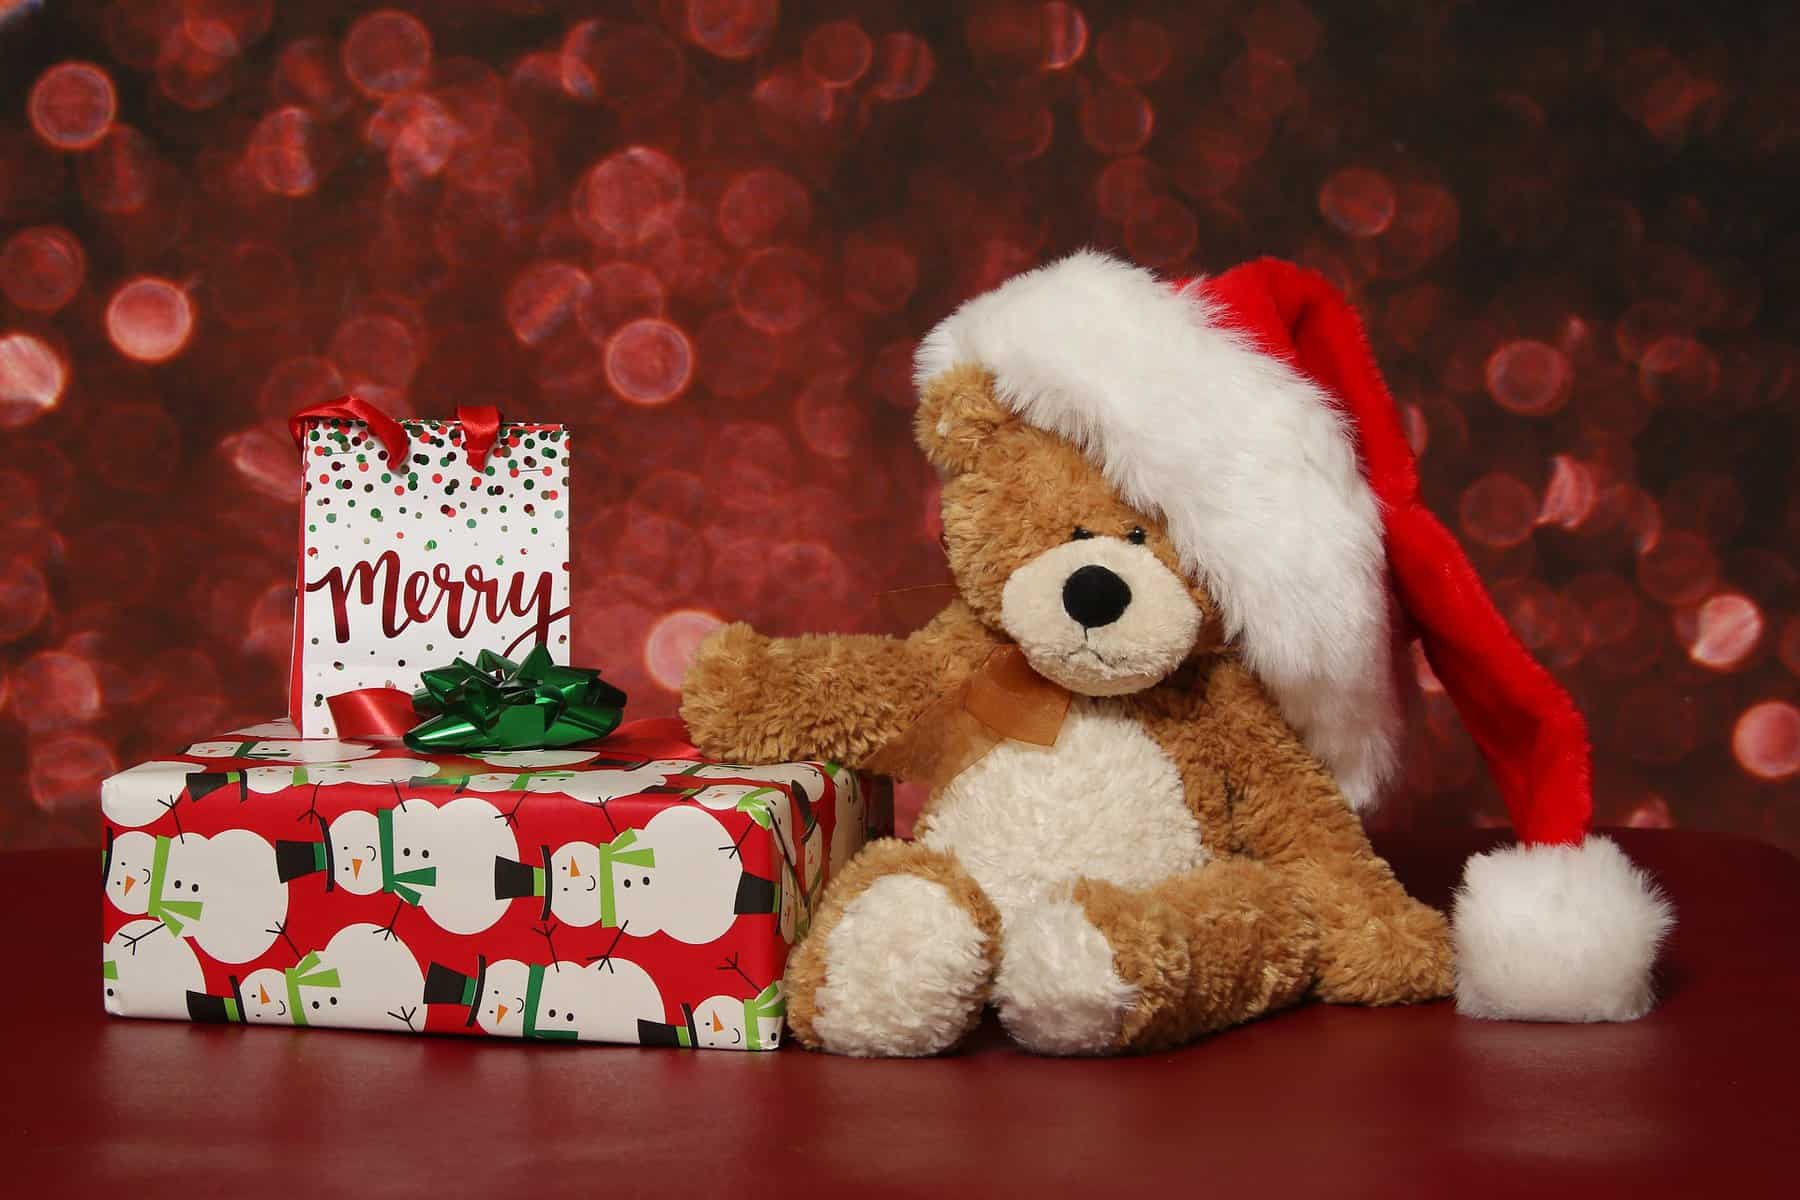 A brown teddy bear wearing a Santa hat sits next to a wrapped present with a Christmas card on it.